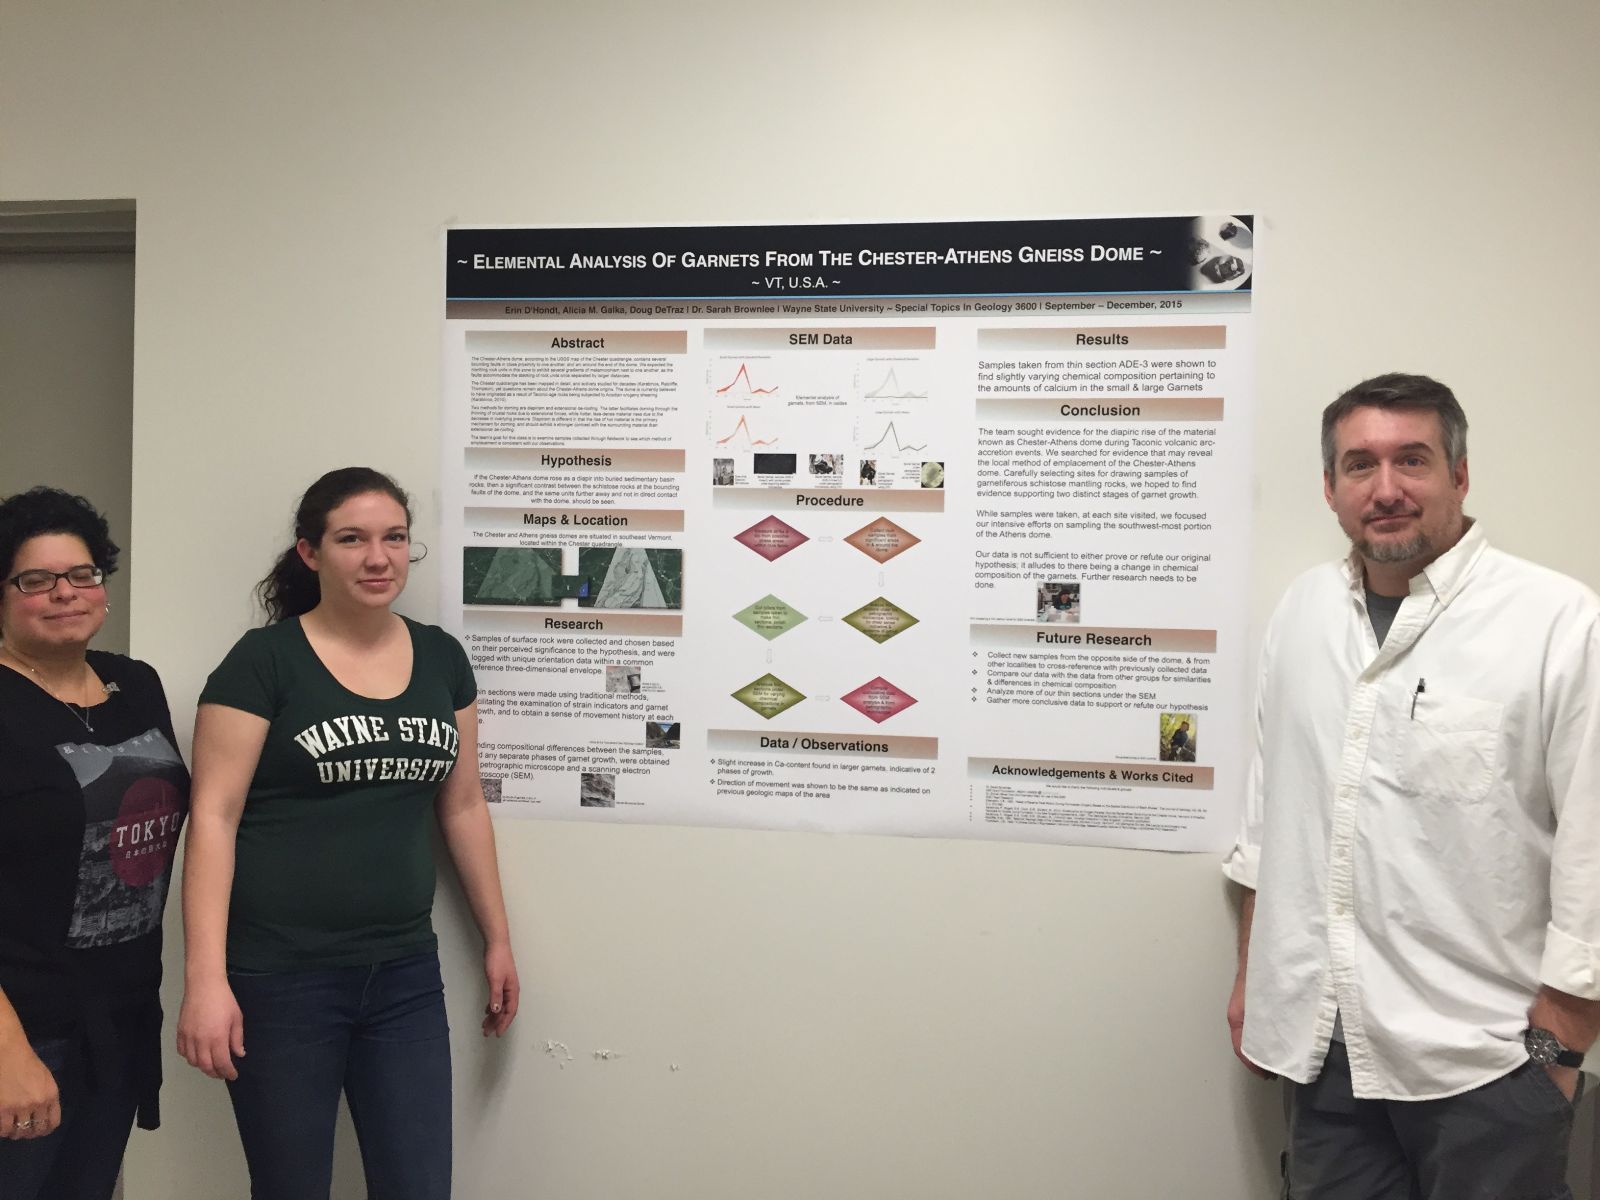 Team members Alicia Galka, Erin D'Hondt and Doug DeTraz with their poster